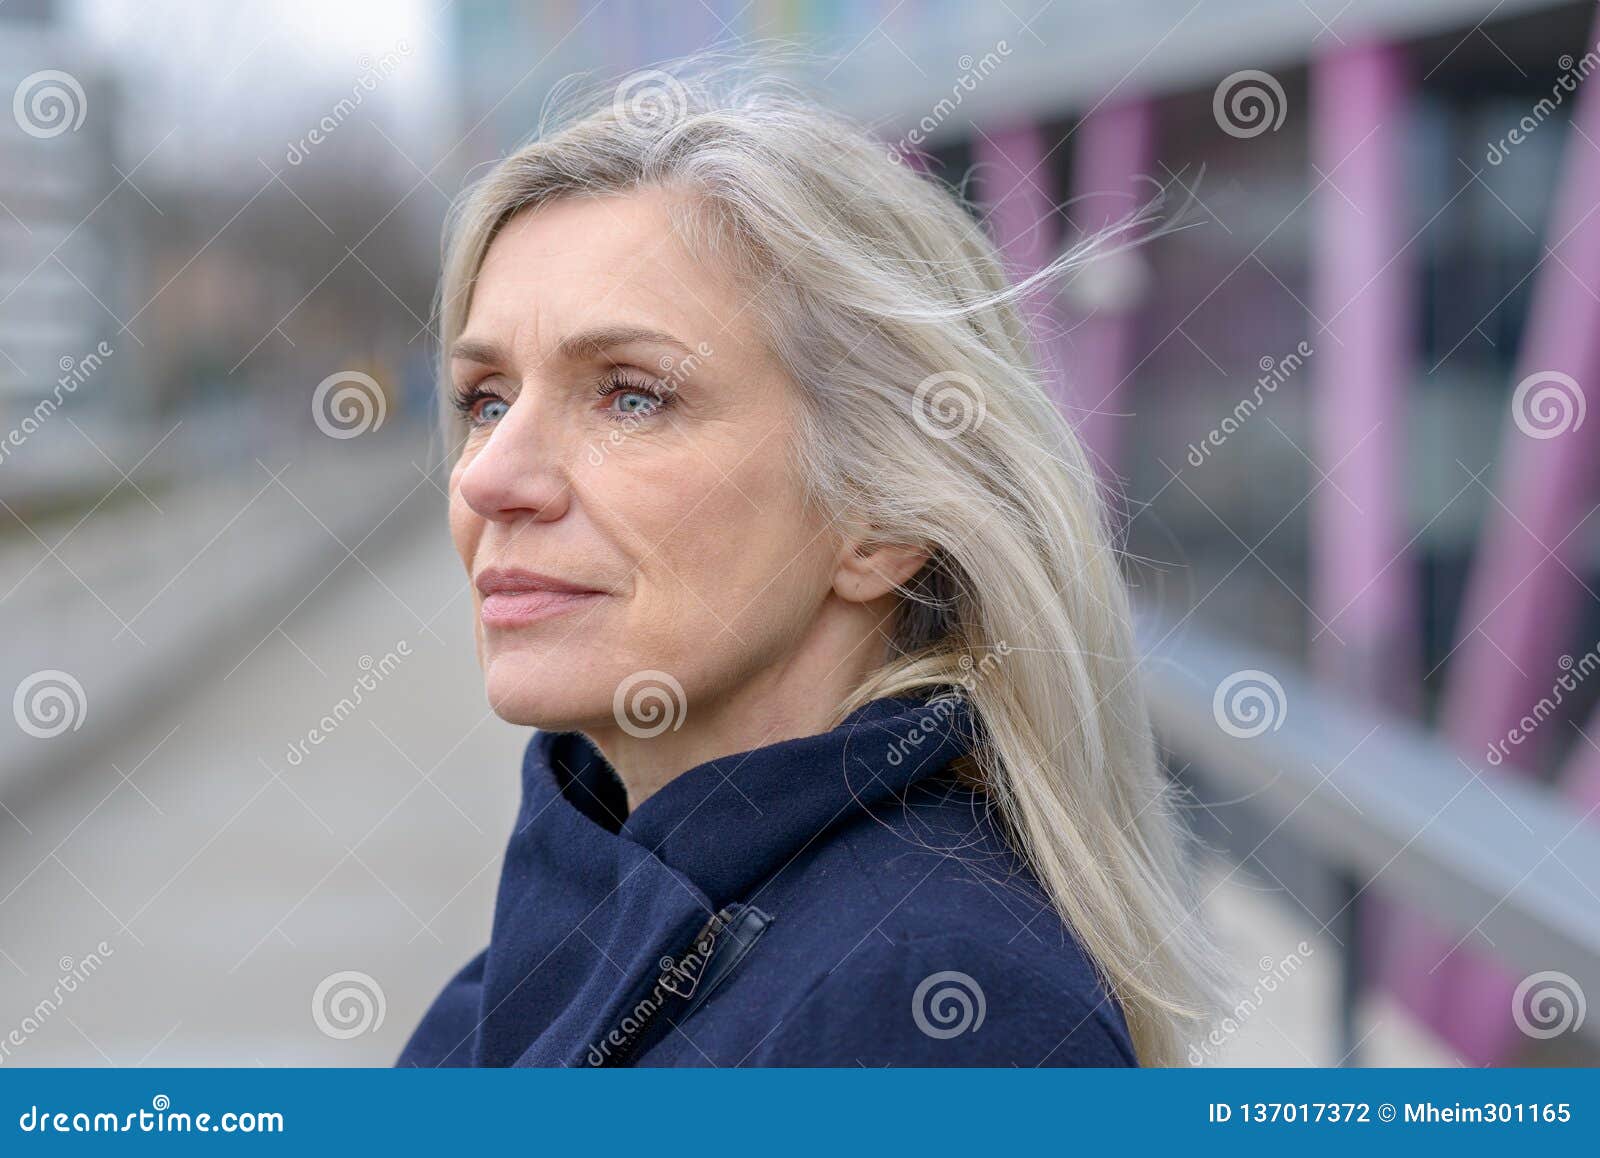 serious woman looking intently to the side